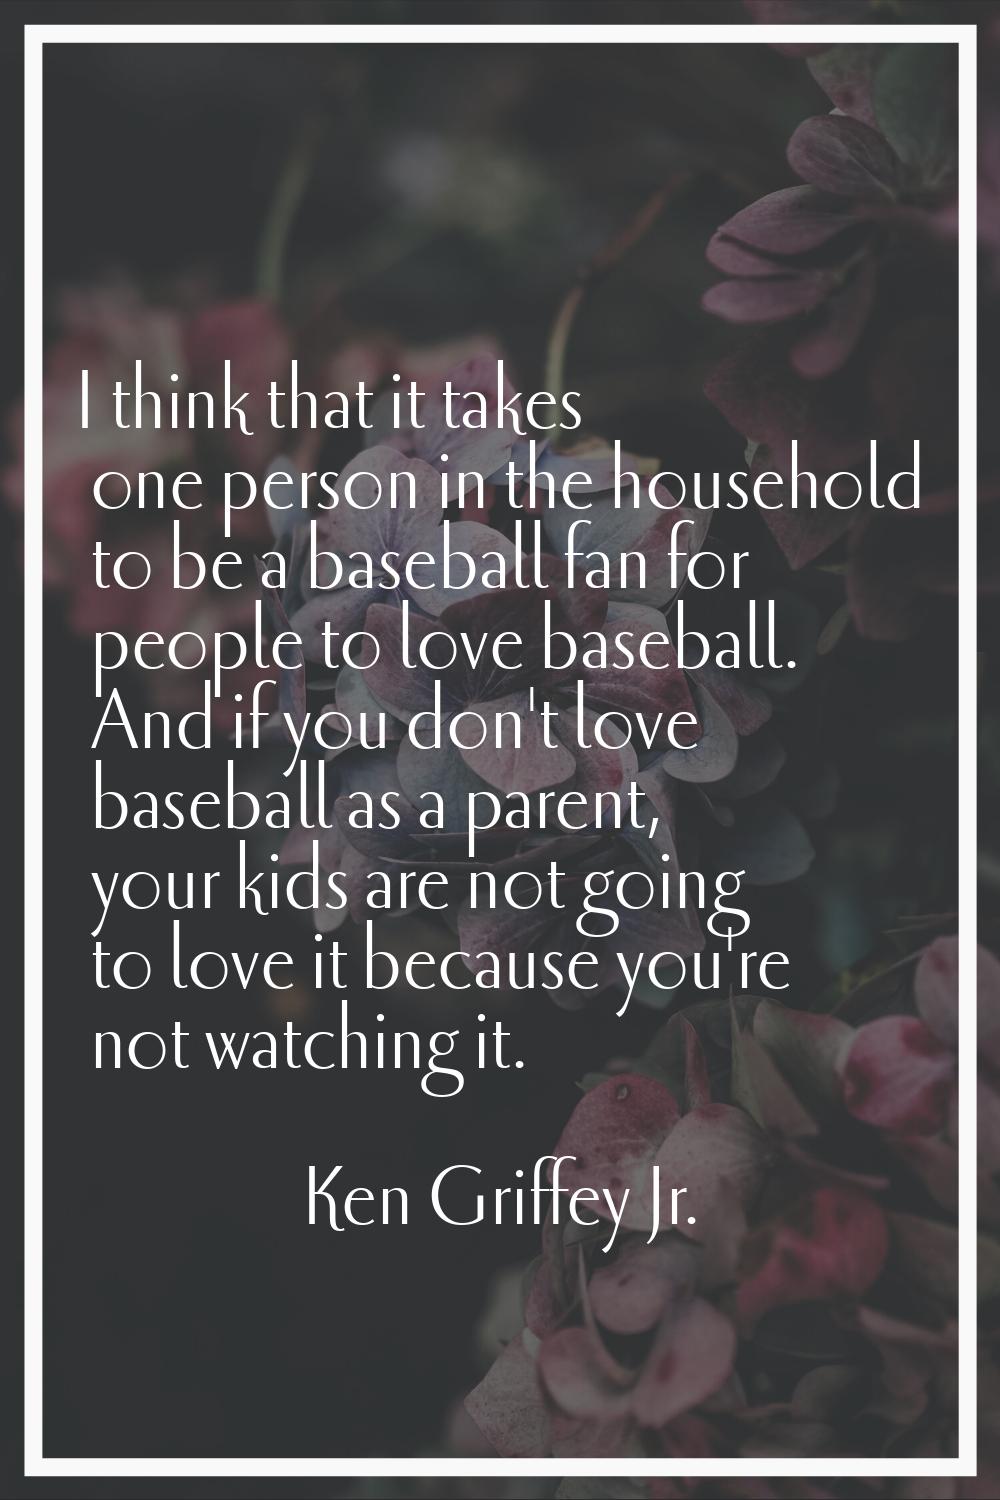 I think that it takes one person in the household to be a baseball fan for people to love baseball.